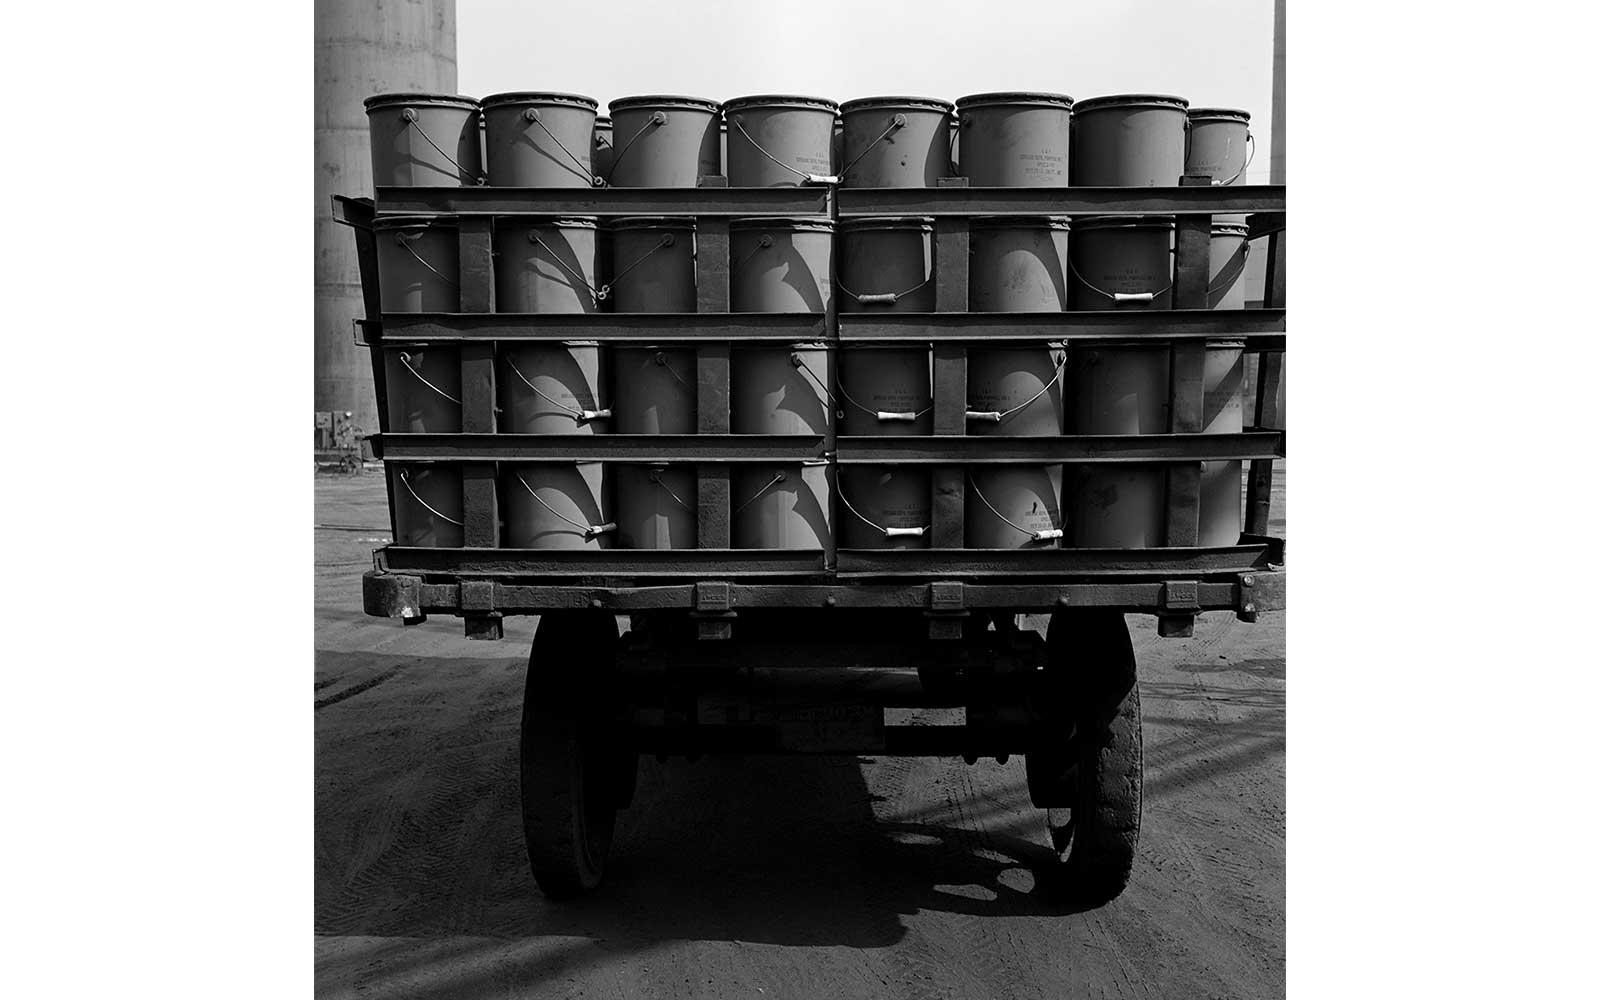 Gordon Parks, Buckets of grease, Pittsburgh Grease Plant, Pittsburgh, PA, March 1944.